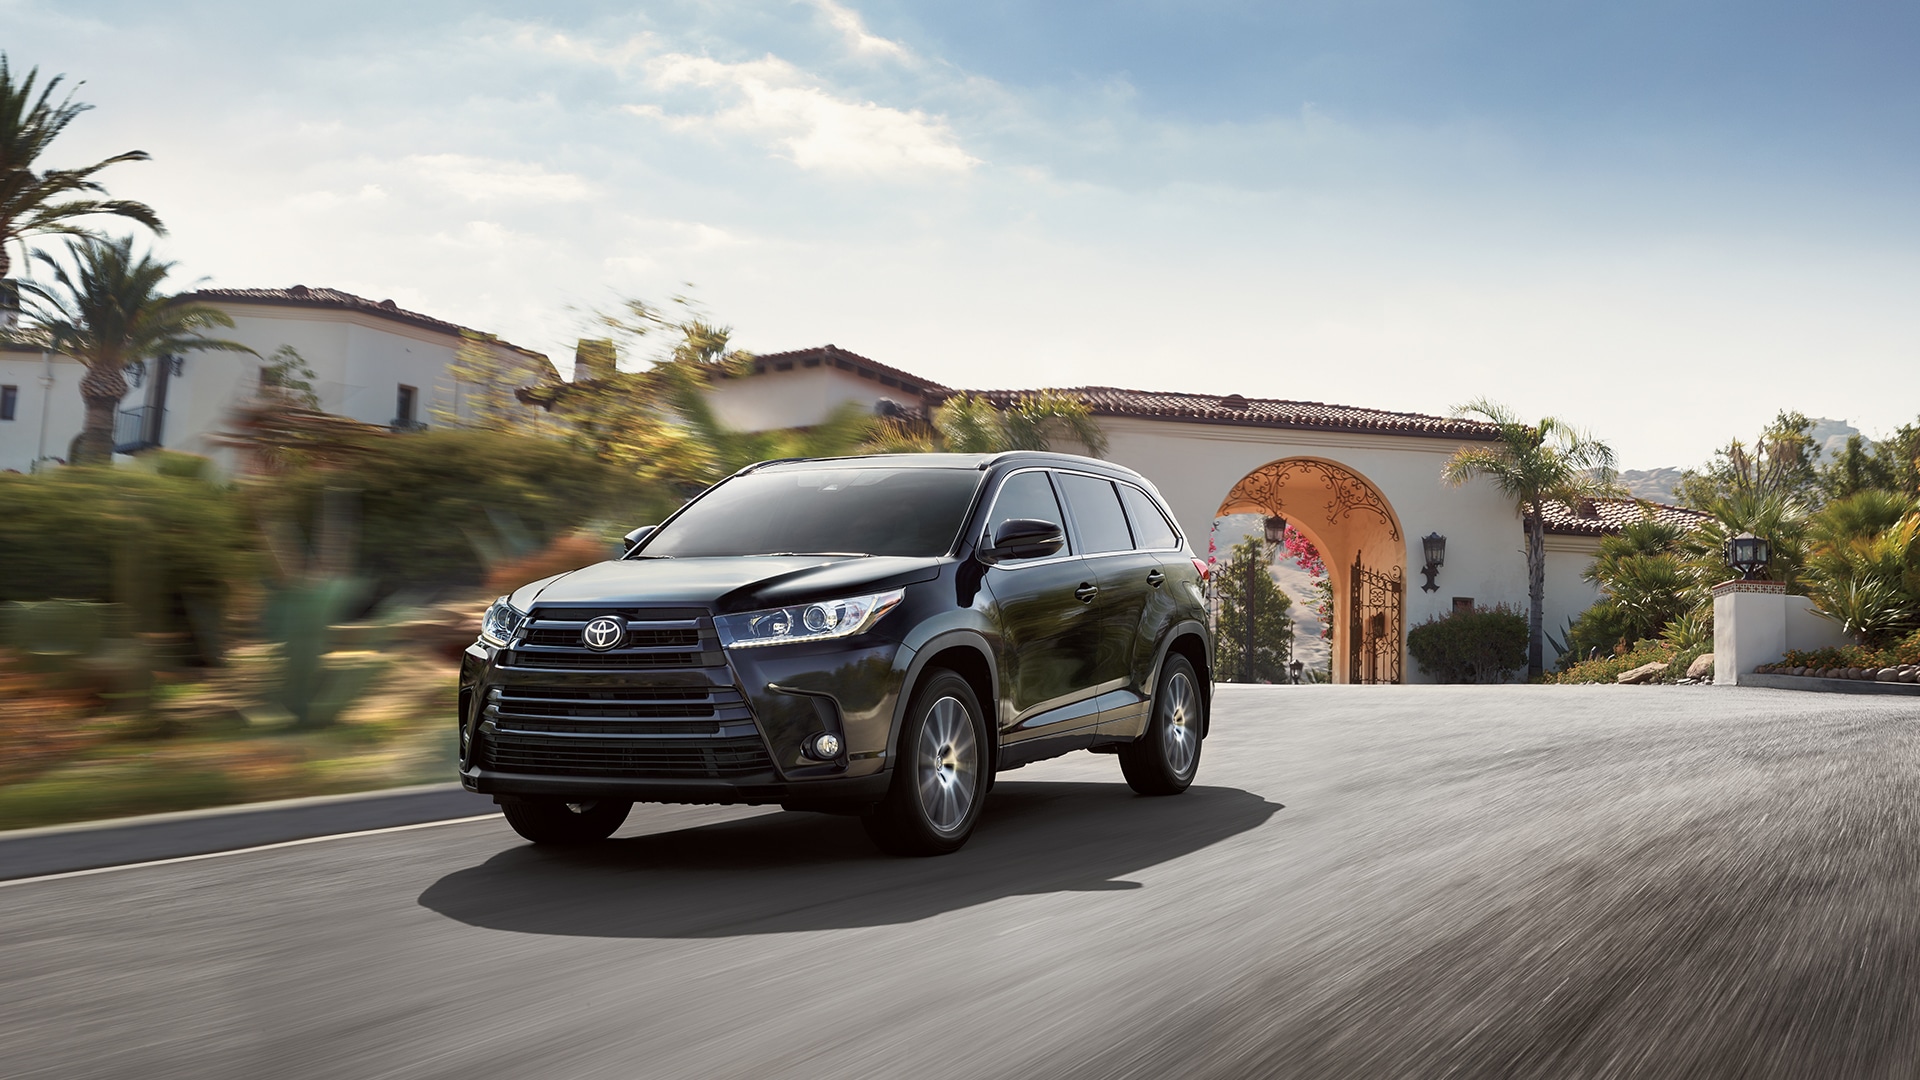 How the 2017 Toyota Highlander Differs from the 2016 Toyota Highlander. Cloud Toyota